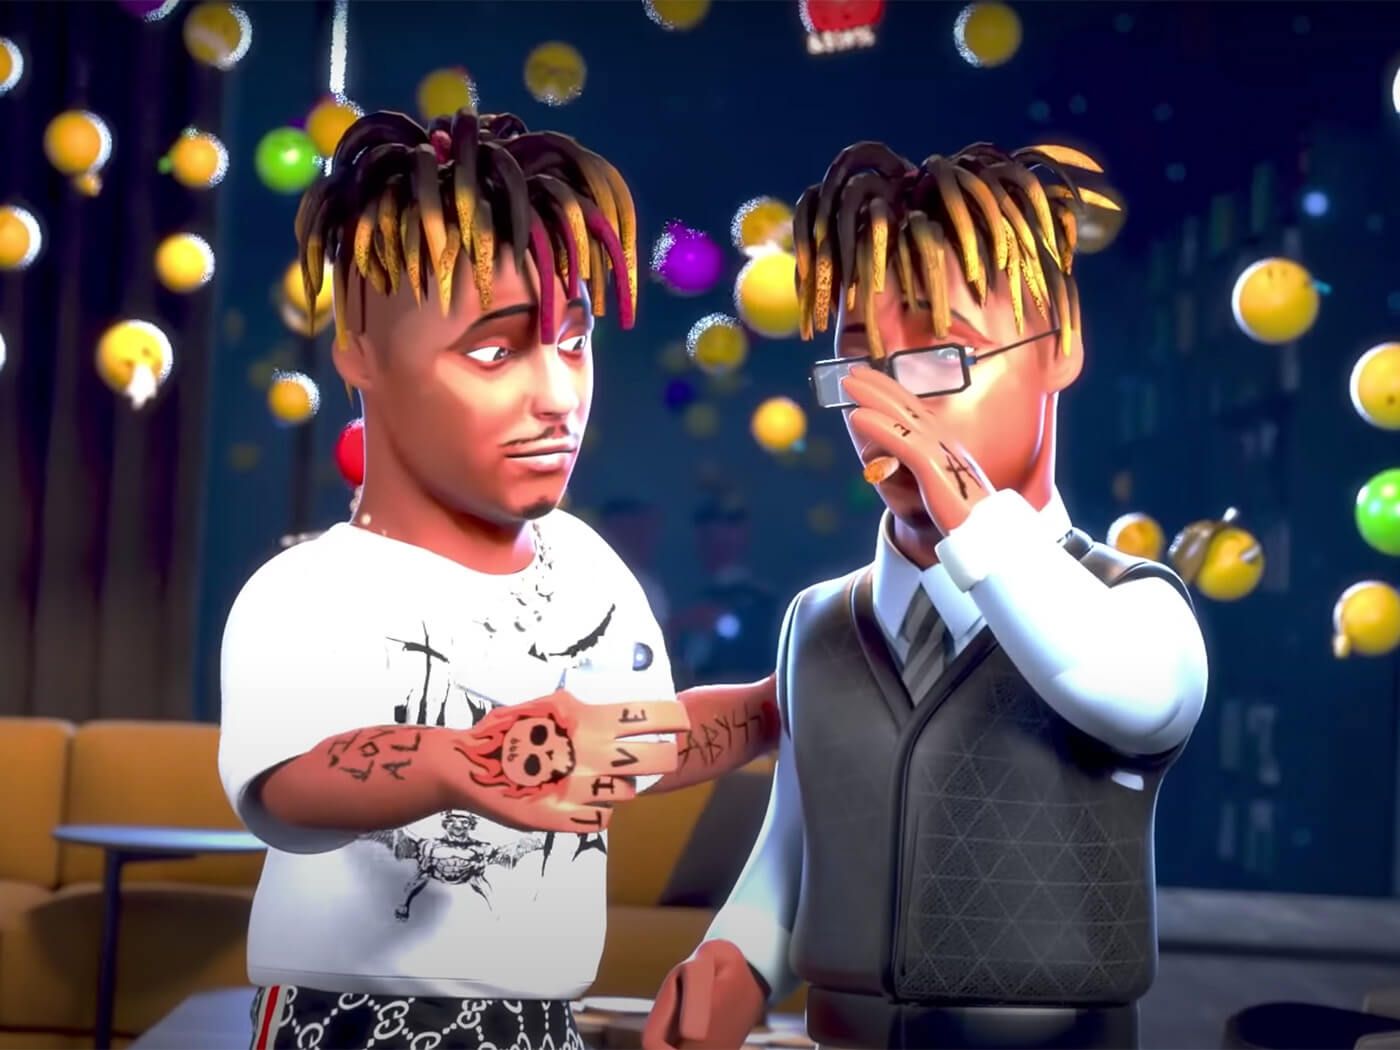 Watch the animated video for Juice WRLD's “Wishing Well”